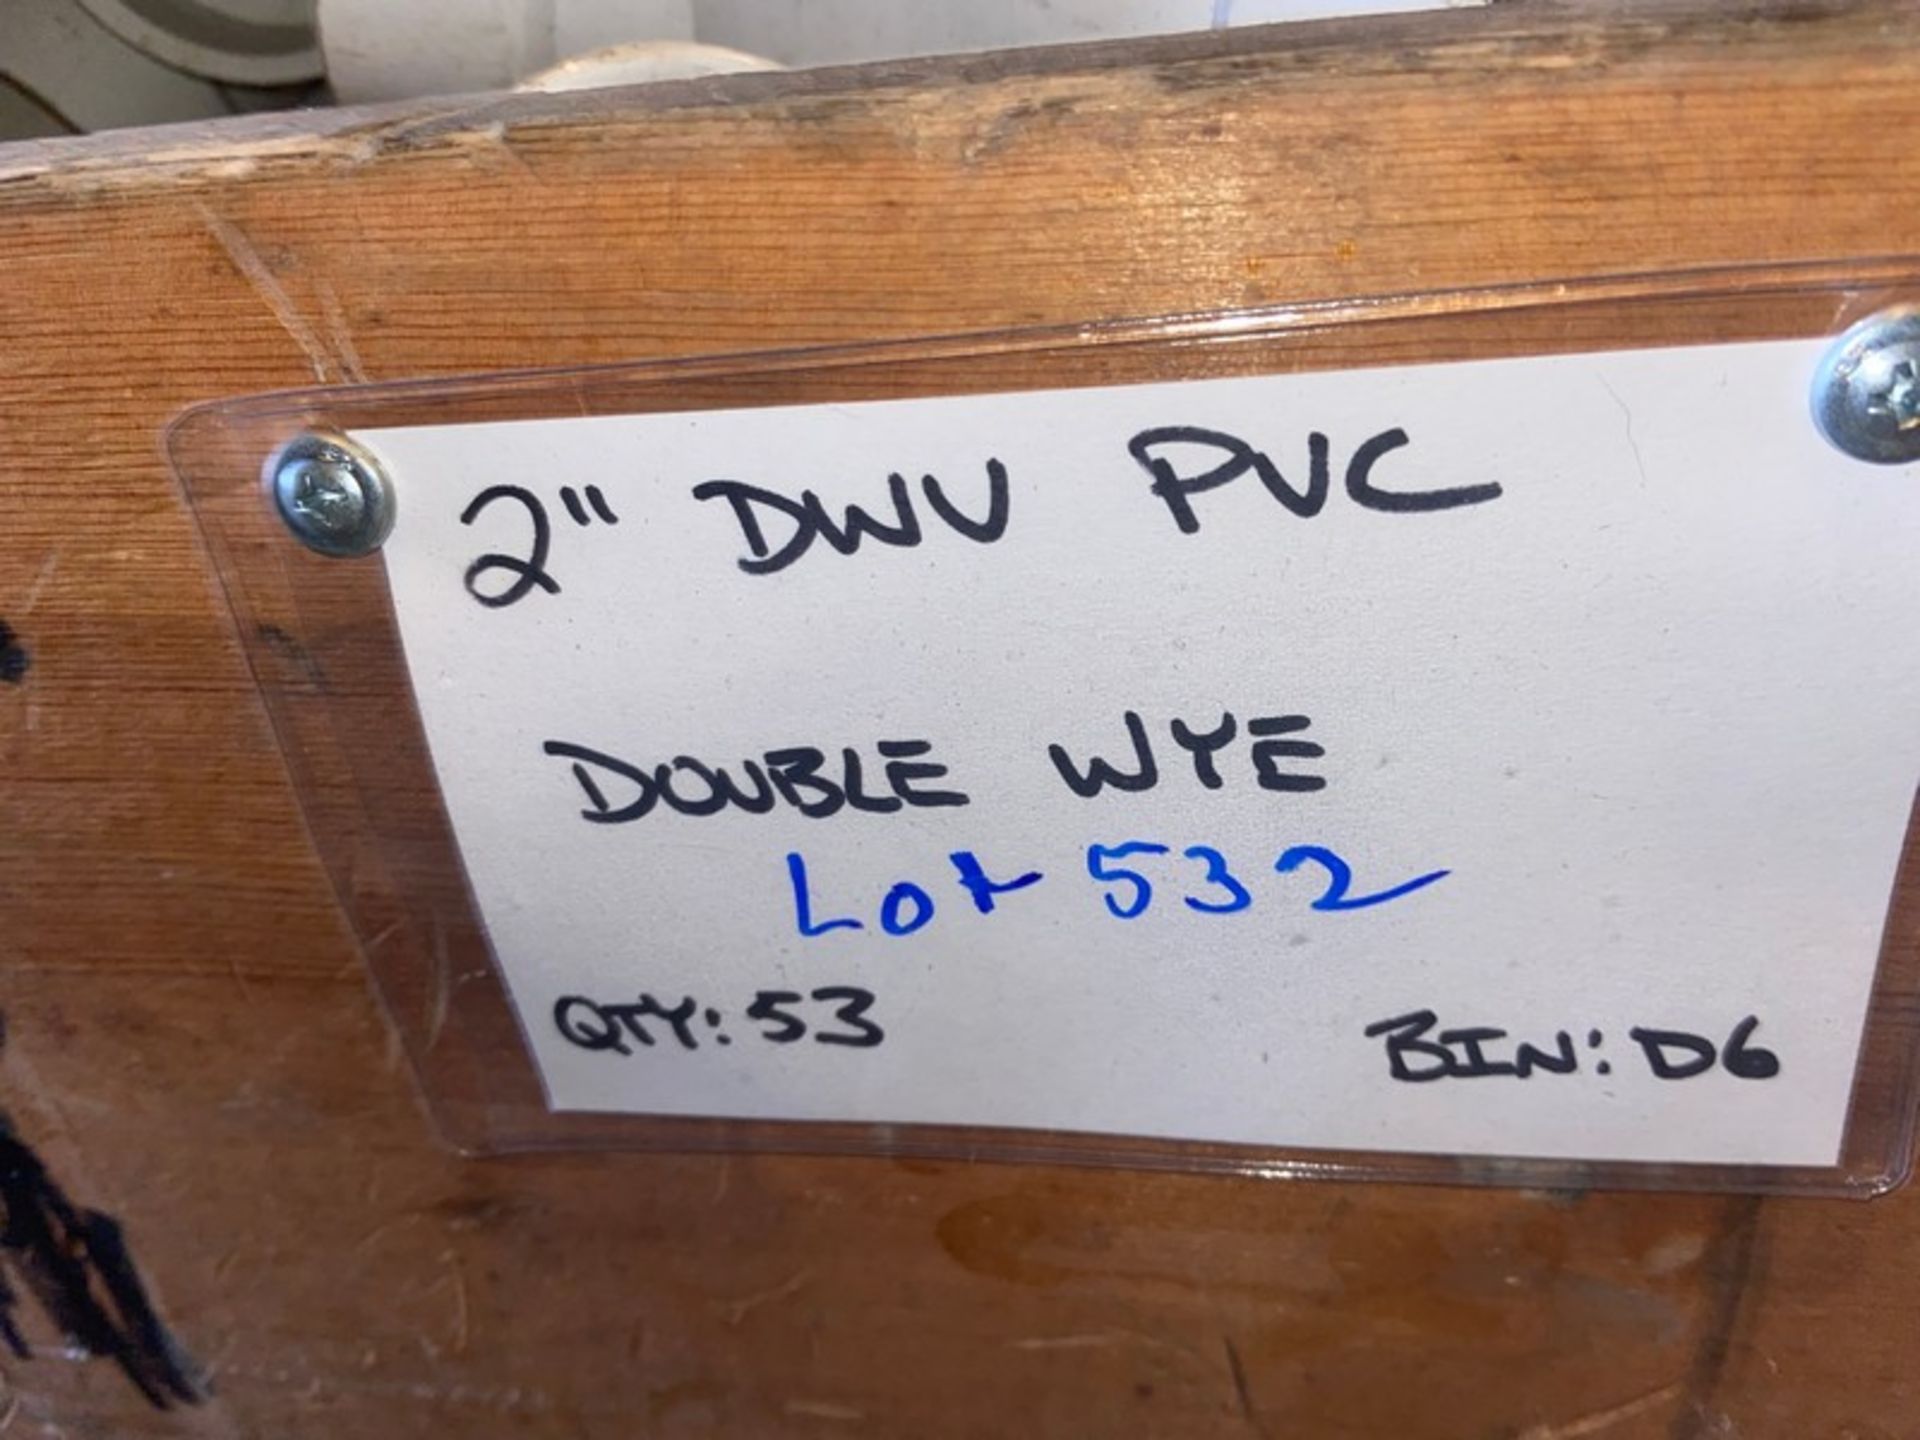 (53) 2” DWV PVC DOUBLE WYE (Bin:D6) (LOCATED IN MONROEVILLE, PA) - Image 2 of 4